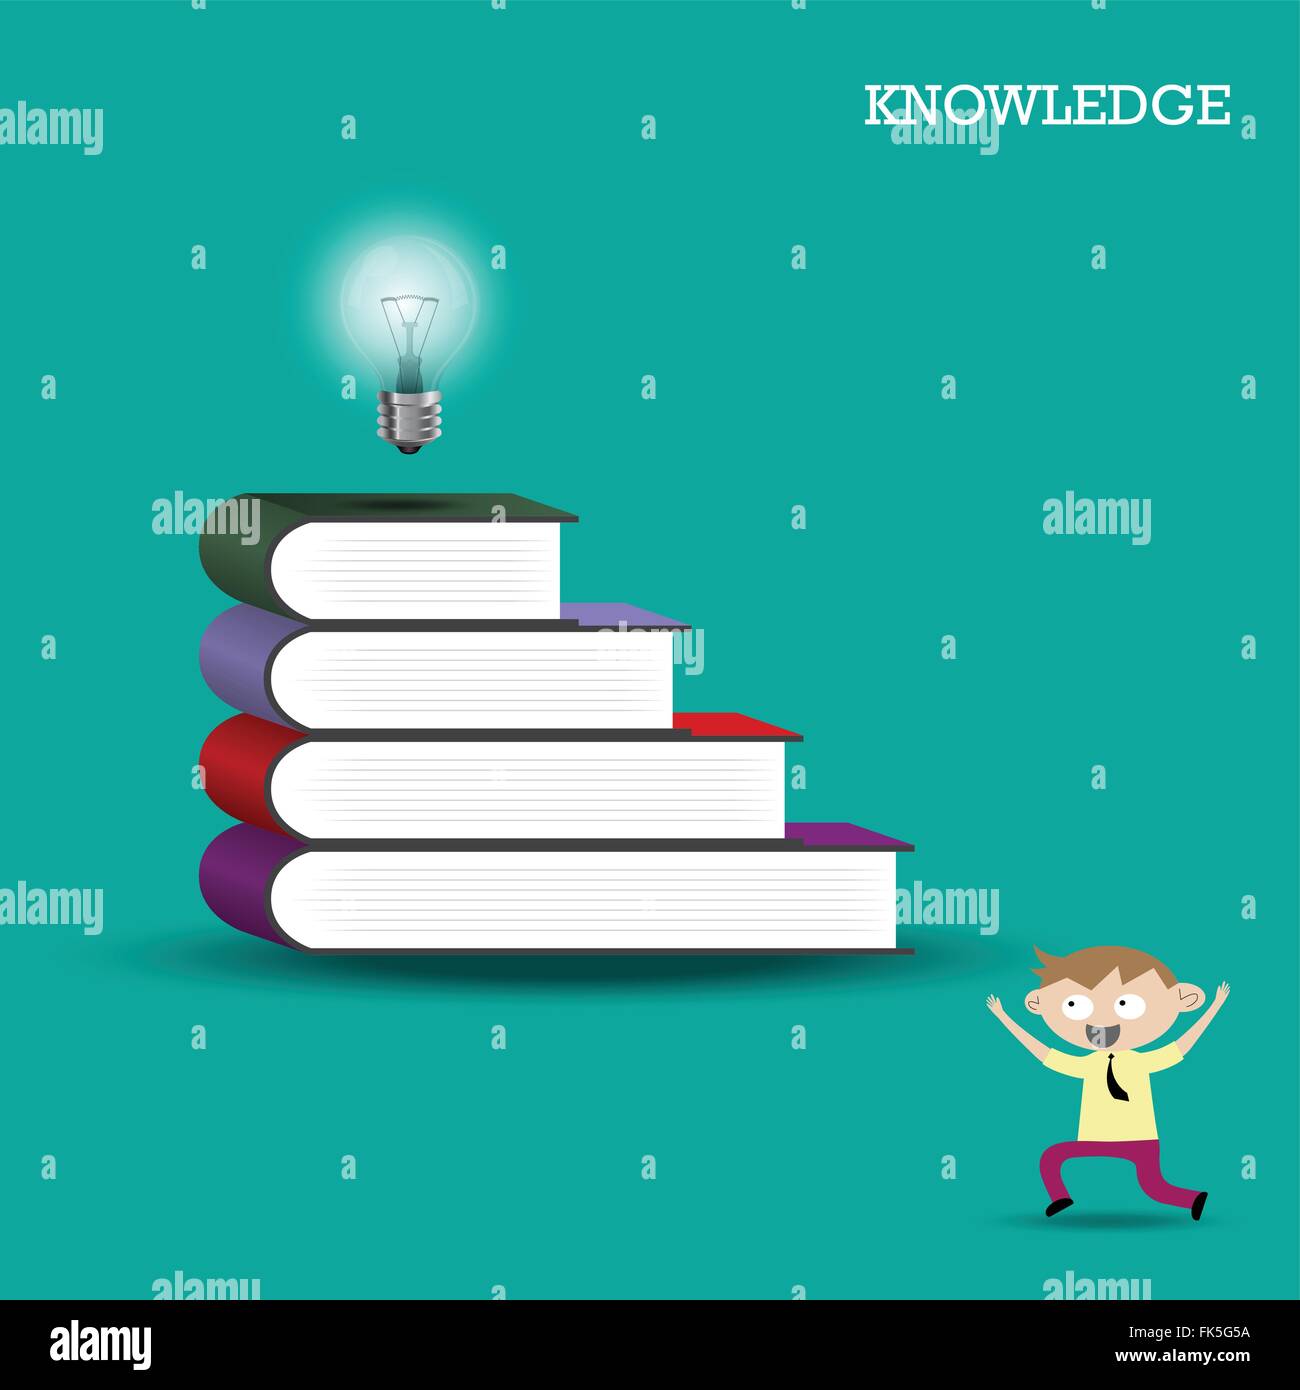 Knowledge and learning concept. Vector illustration Stock Vector